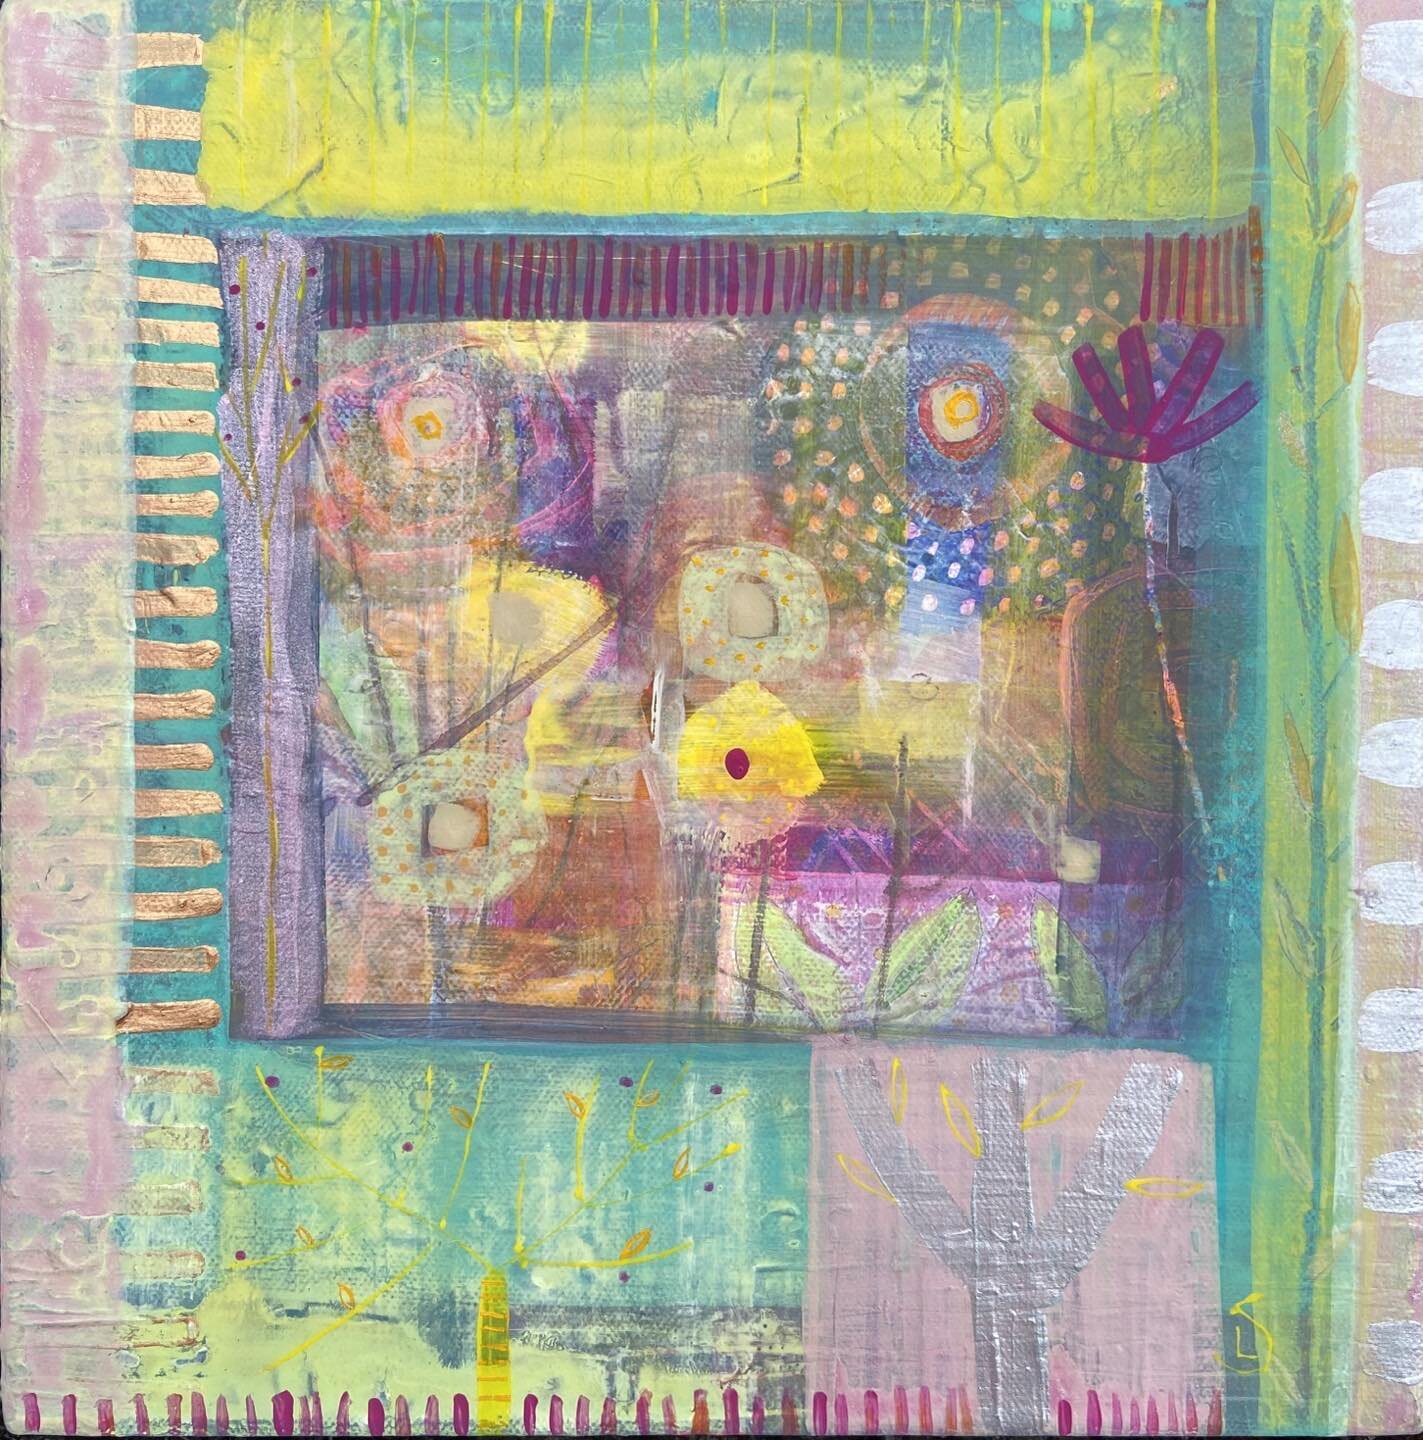 Alice through the Looking Glass
Mixed media abstract
York Open Studios

Another mixed media feast of colour and pattern for @yorkopenstudios 

Although abstract, these little mixed media paintings are still inspired by nature and landscape. If you lo